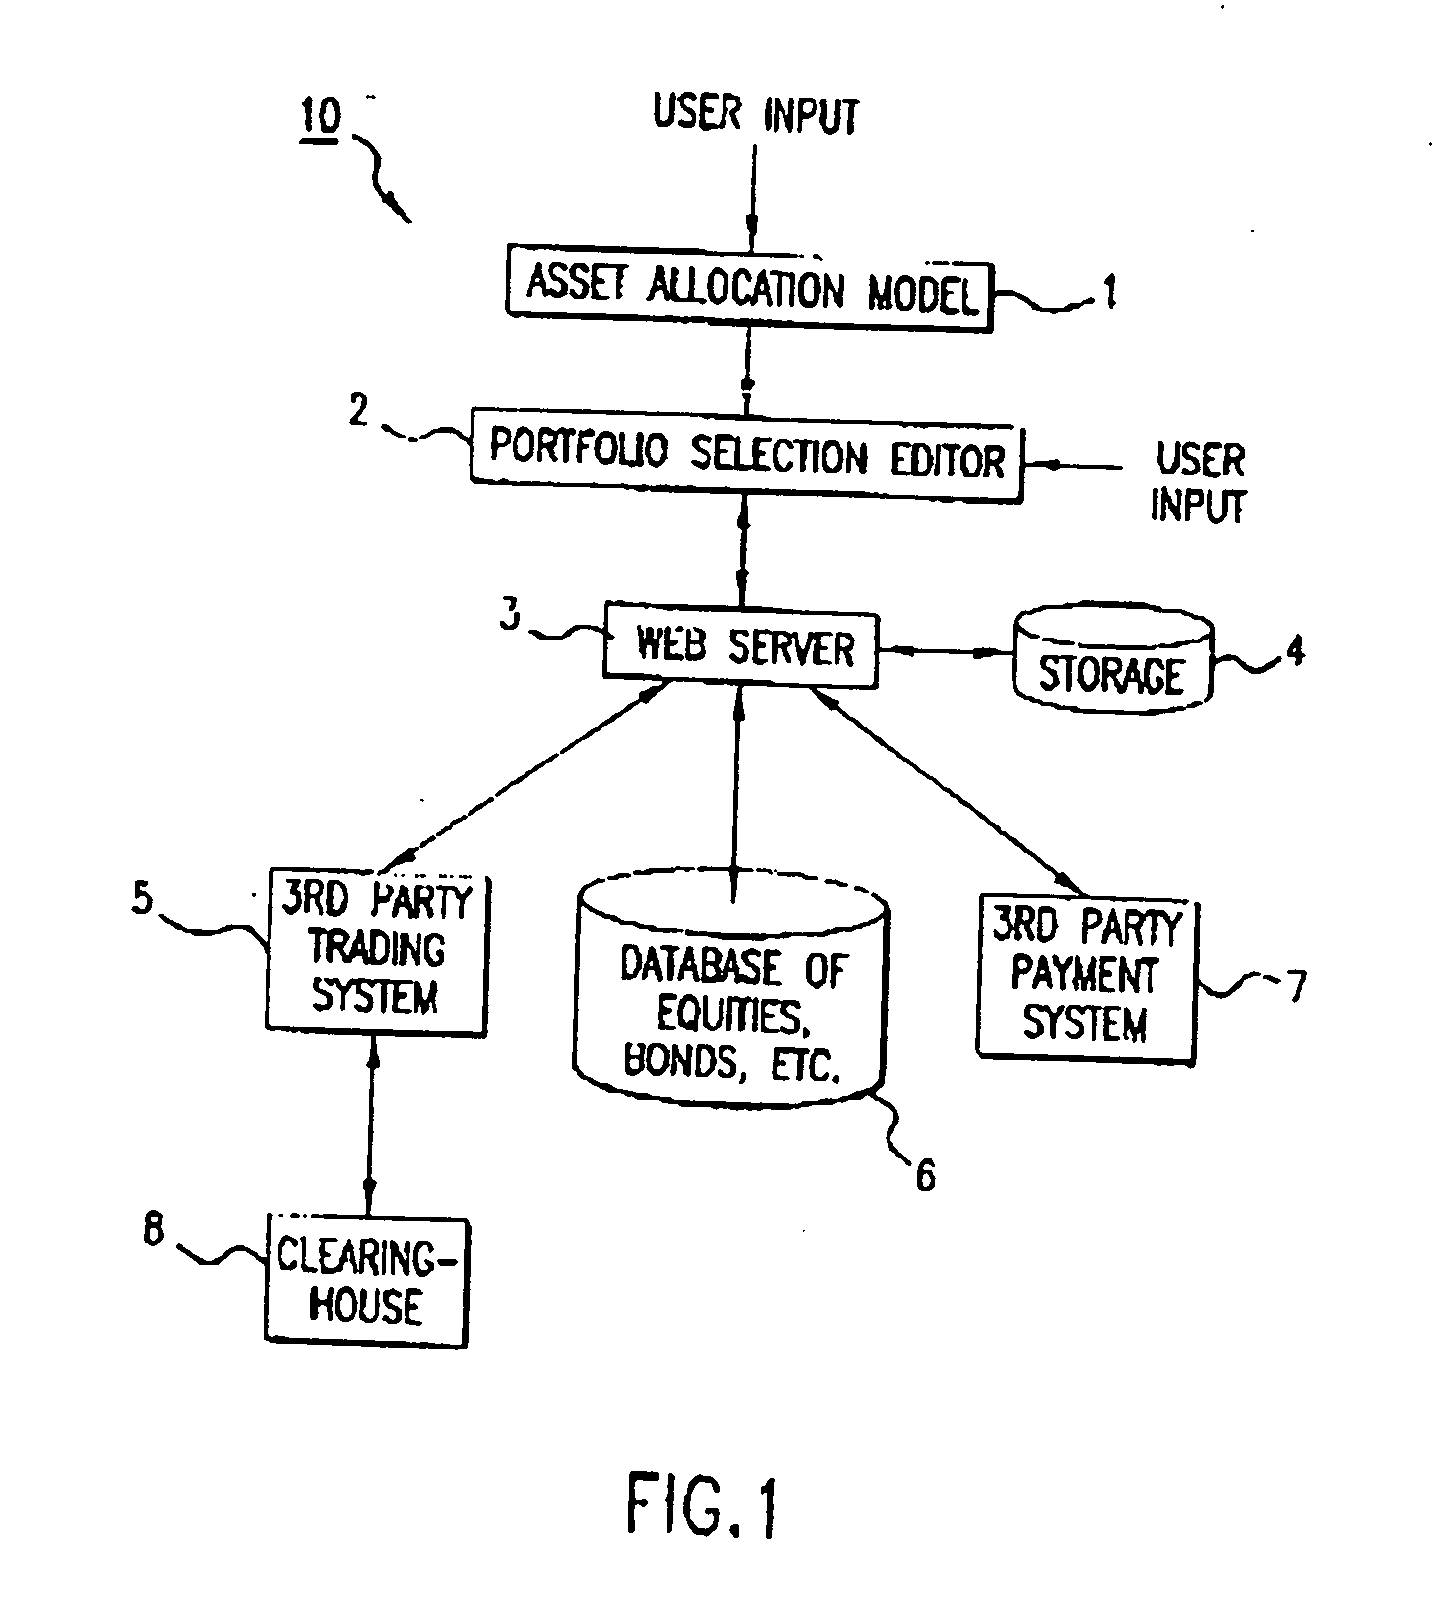 Method and apparatus for trading securities or other instruments